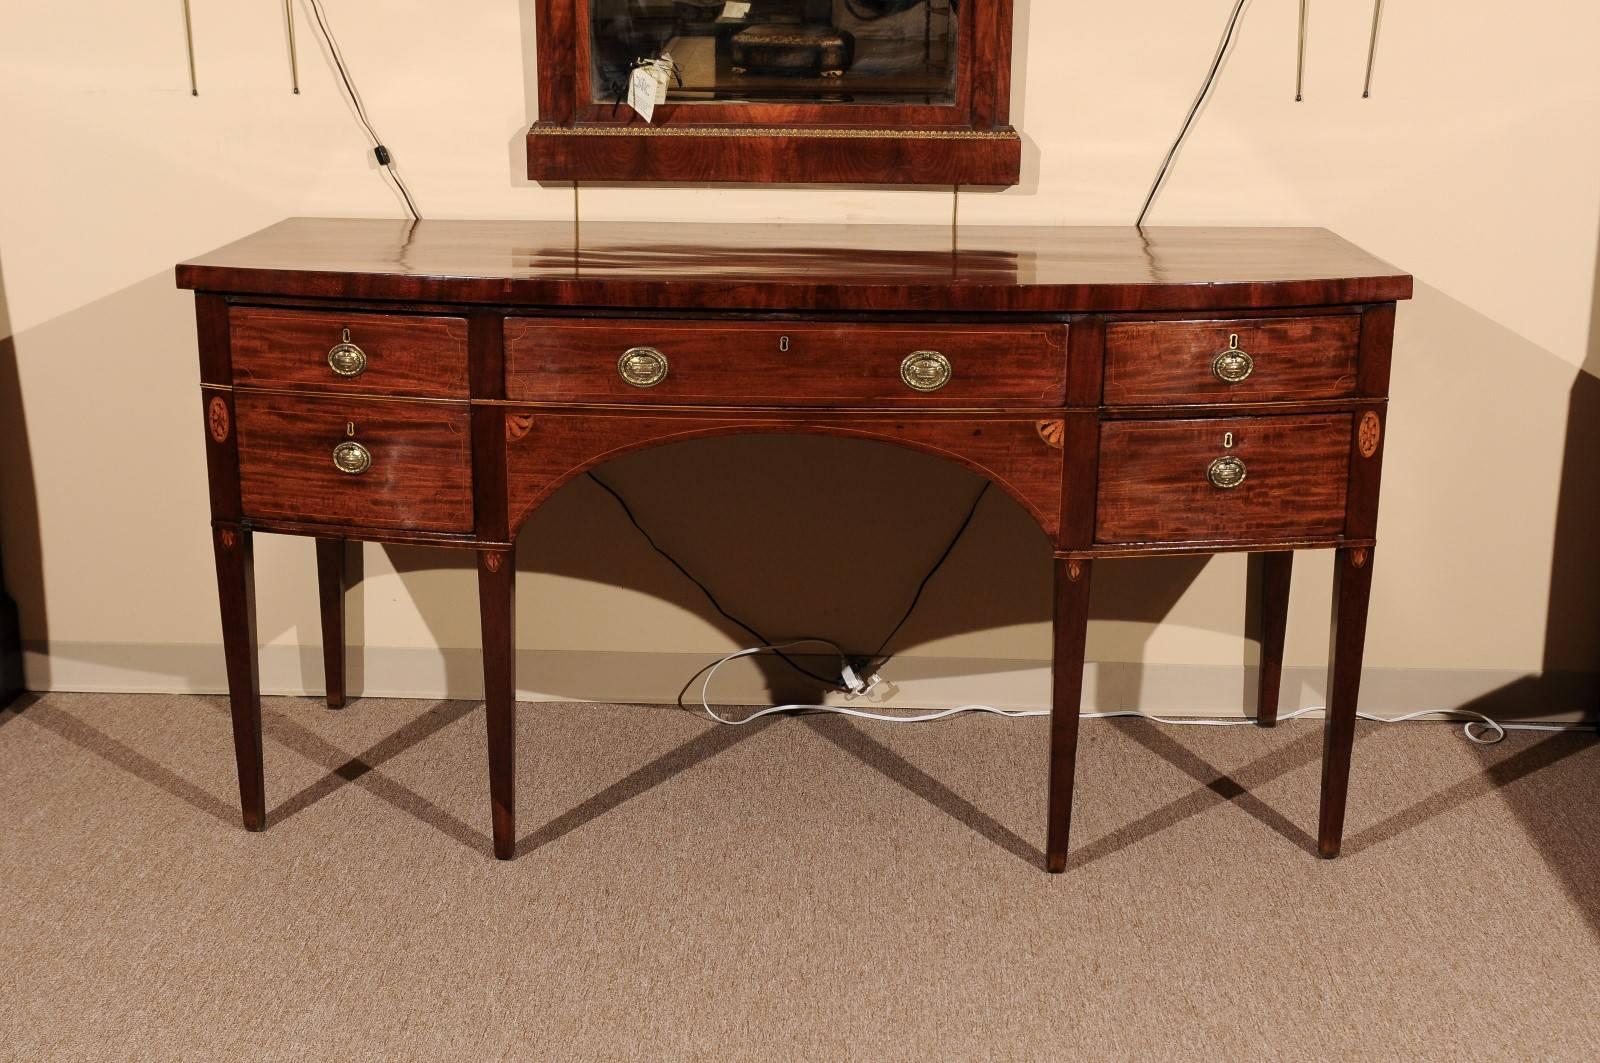 Early 19th century English mahogany sideboard with bow-front, marquetry inlay and square tapering legs.